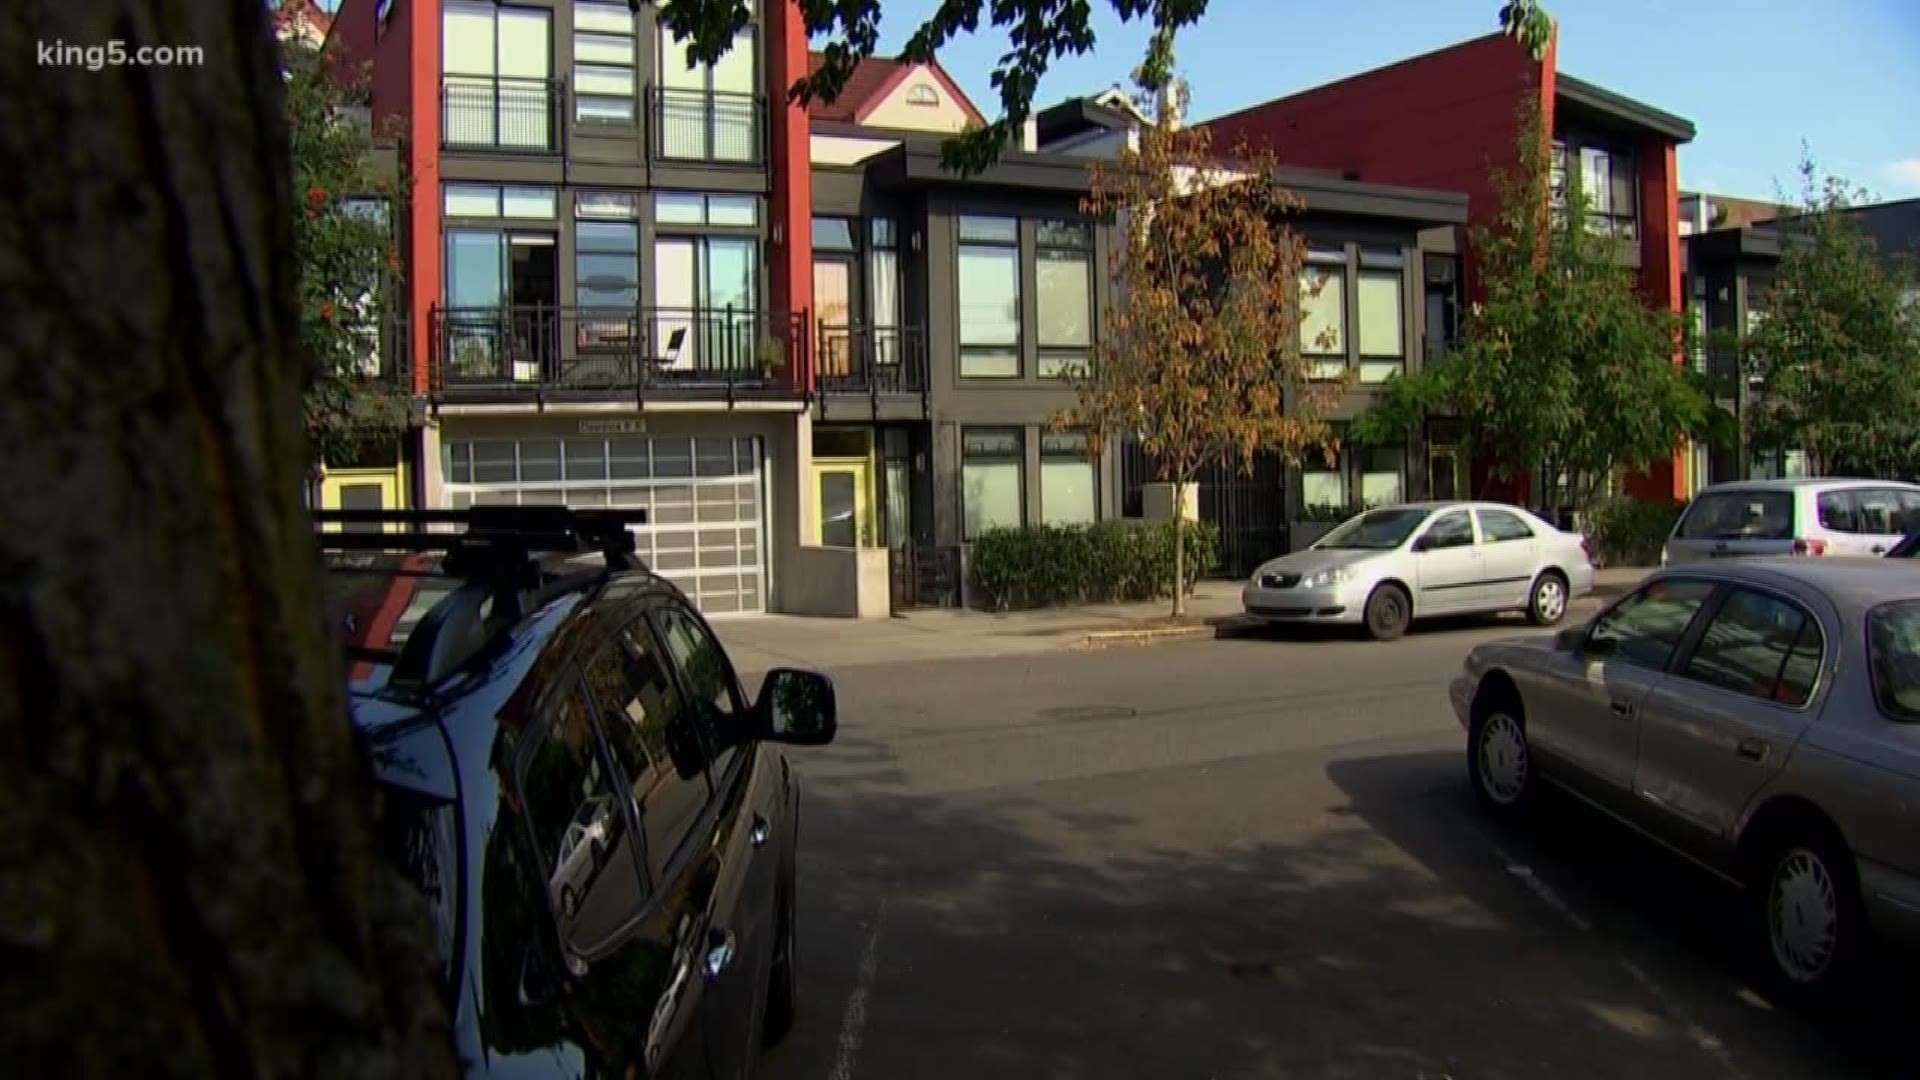 The City of Kenmore said its housing stock is low and rent increases are causing real emergencies for some families. KING 5's Natalie Swaby reports how a new ordinance aims to help.